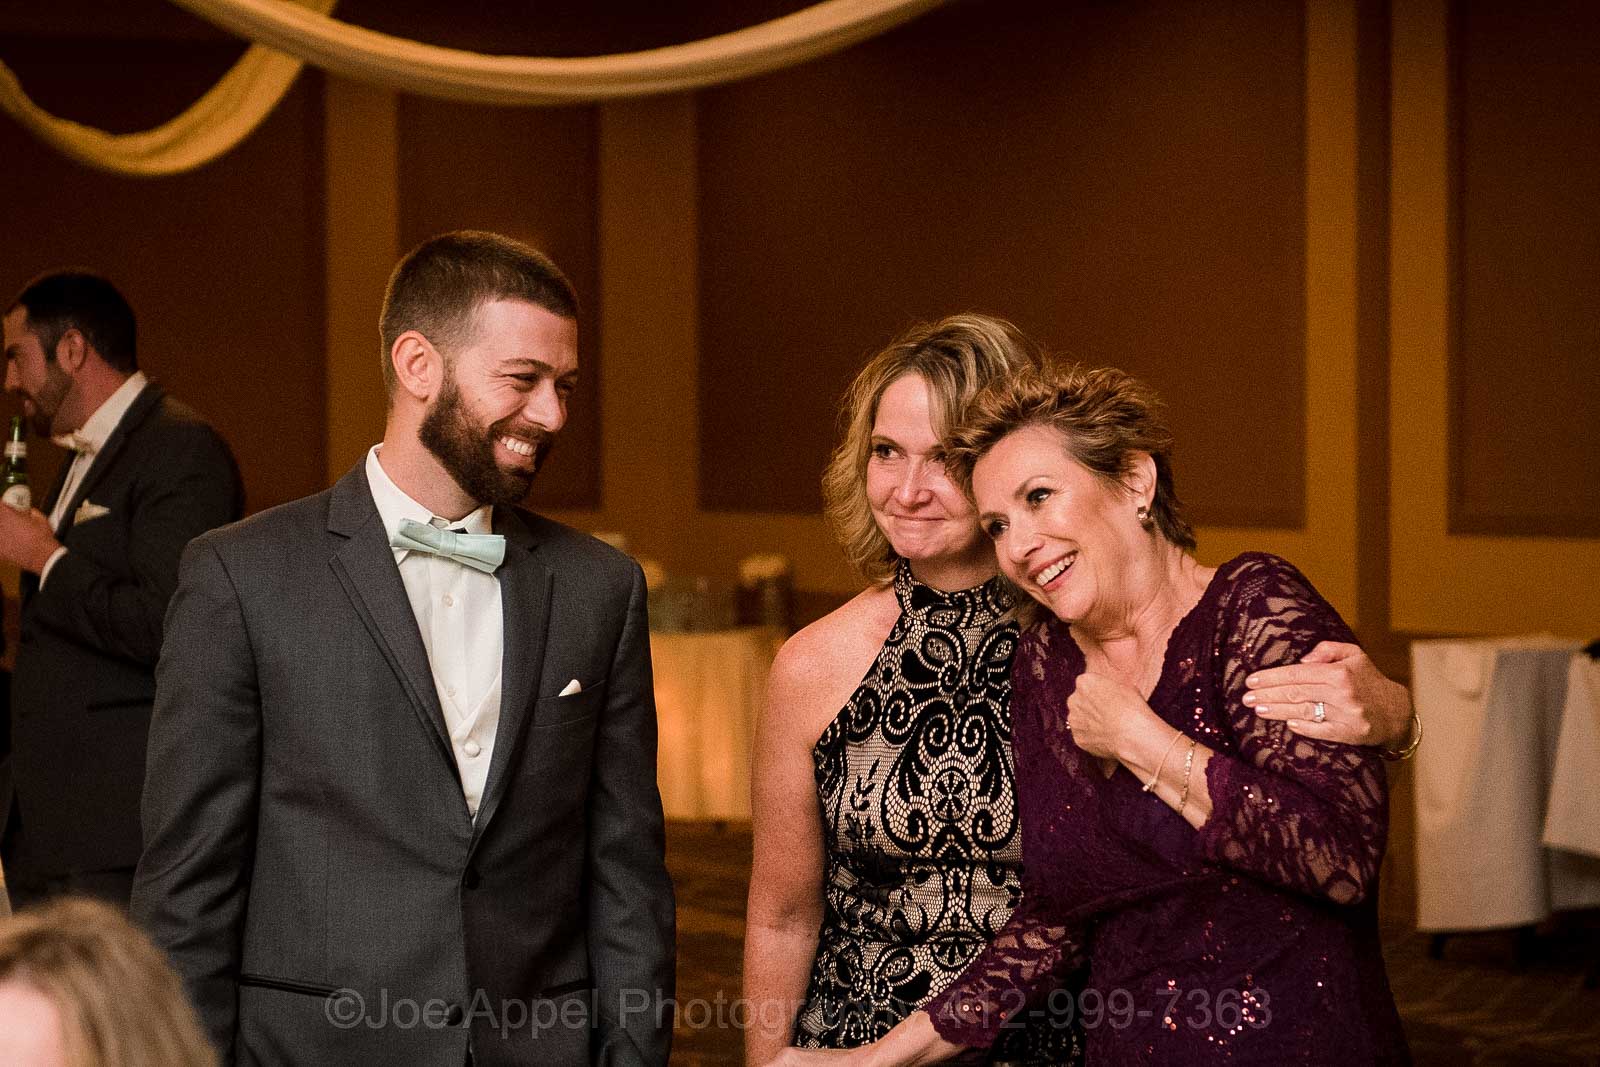 The bride's mom smiles as she is embraced by another woman while standing with her son as they watch the bride dance with her father.